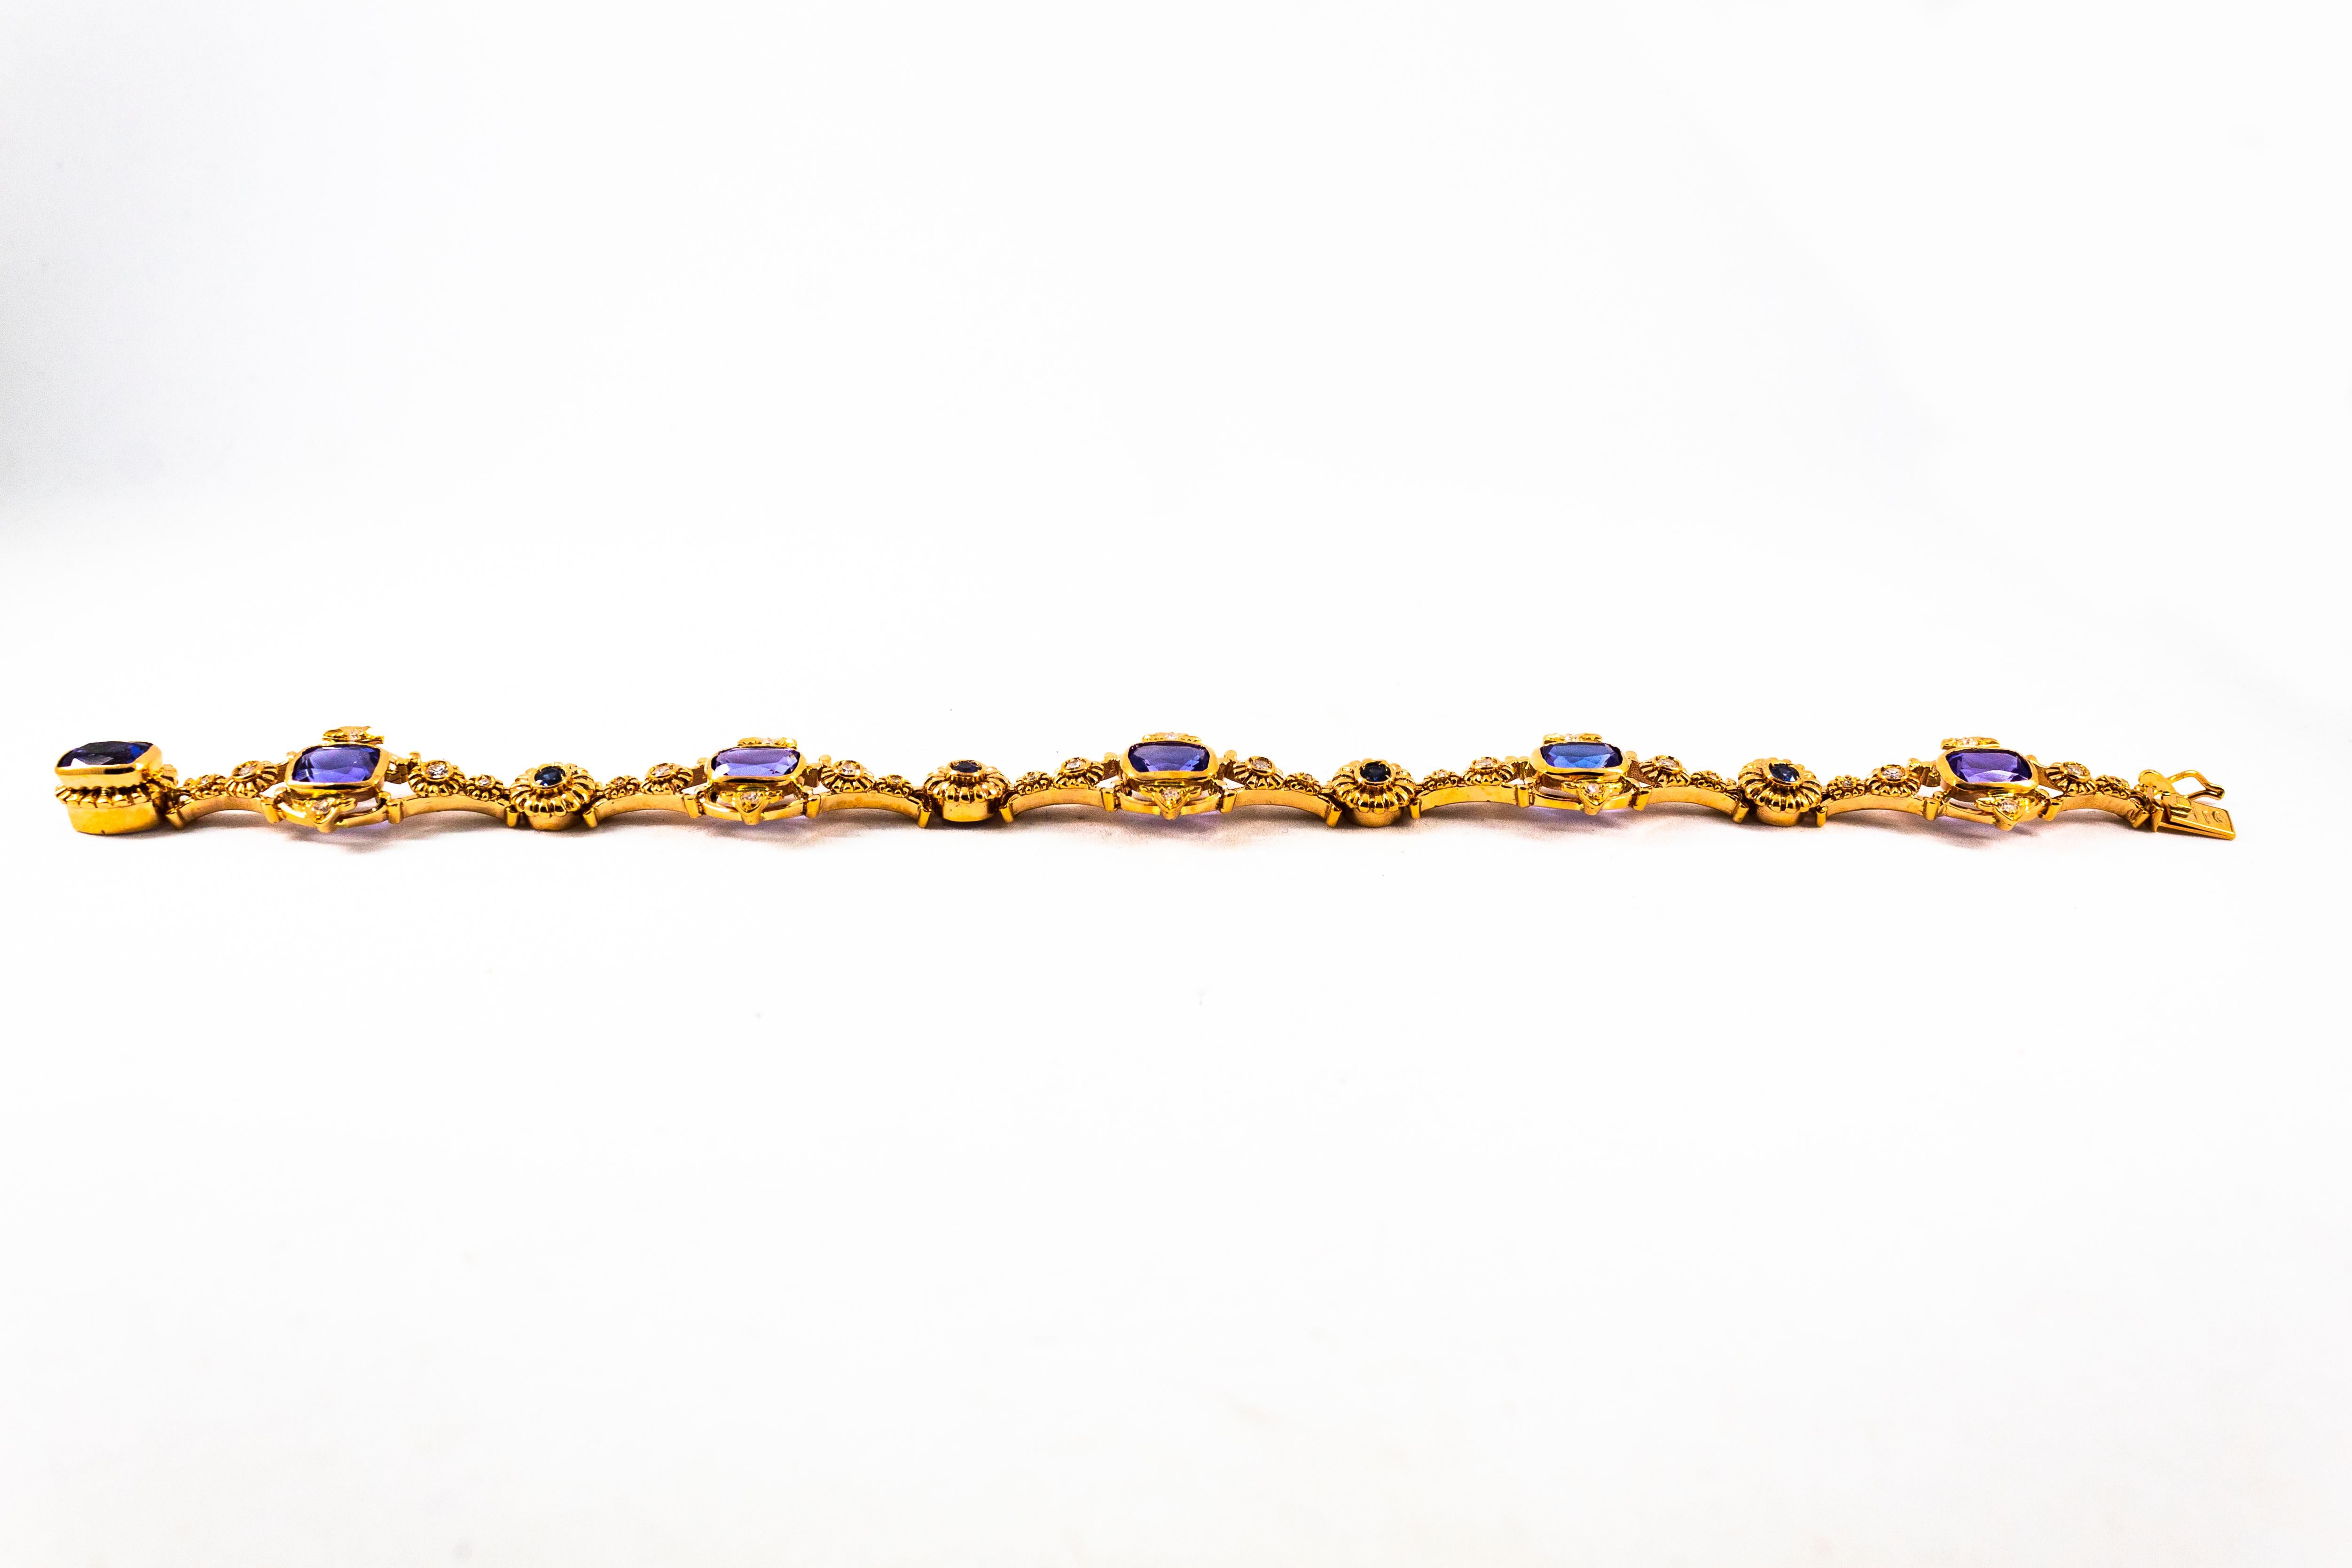 This Bracelet is made of 14K Yellow Gold.
This Bracelet has 0.60 Carats of White Brilliant Cut Diamonds.
This Bracelet has 0.30 Carats of Blue Sapphires.
This Bracelet has 6.00 Carats of Natural Tanzanite.

This Bracelet is available also with Opals